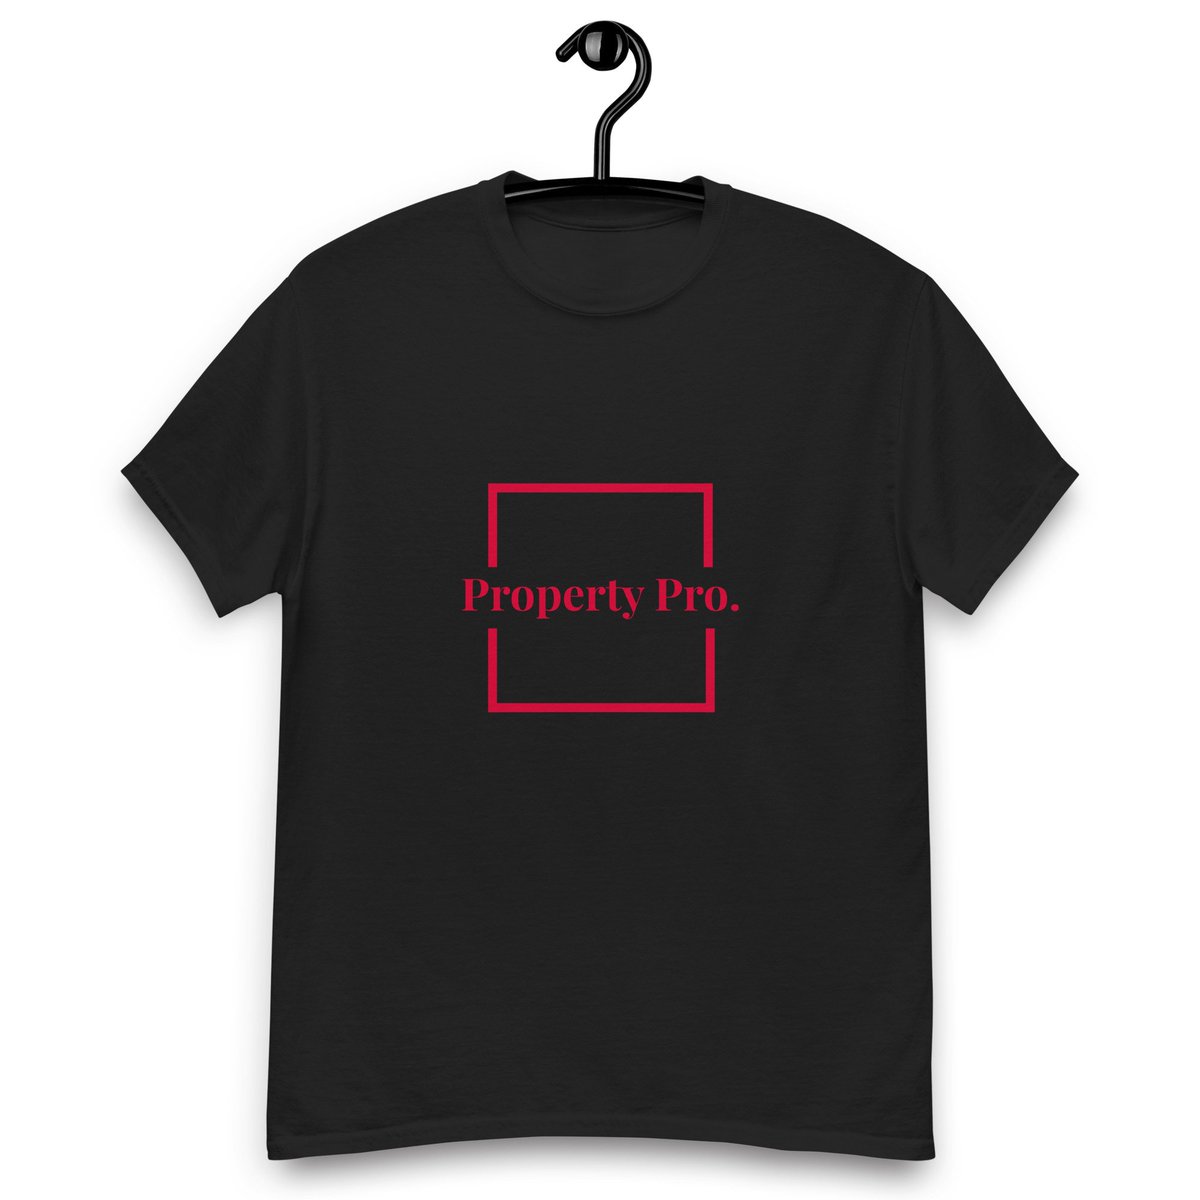 Excited to share the latest addition to my #etsy shop: Property Pro. T-shirt for Realtors, Gift for Real Estate Agent, Gift For Realtor, Realtor Gift, Realtor Shirt etsy.me/3WBs5zr #shortsleeve #realtorgift #realestateagent #brokergift #realestategift #giftforr